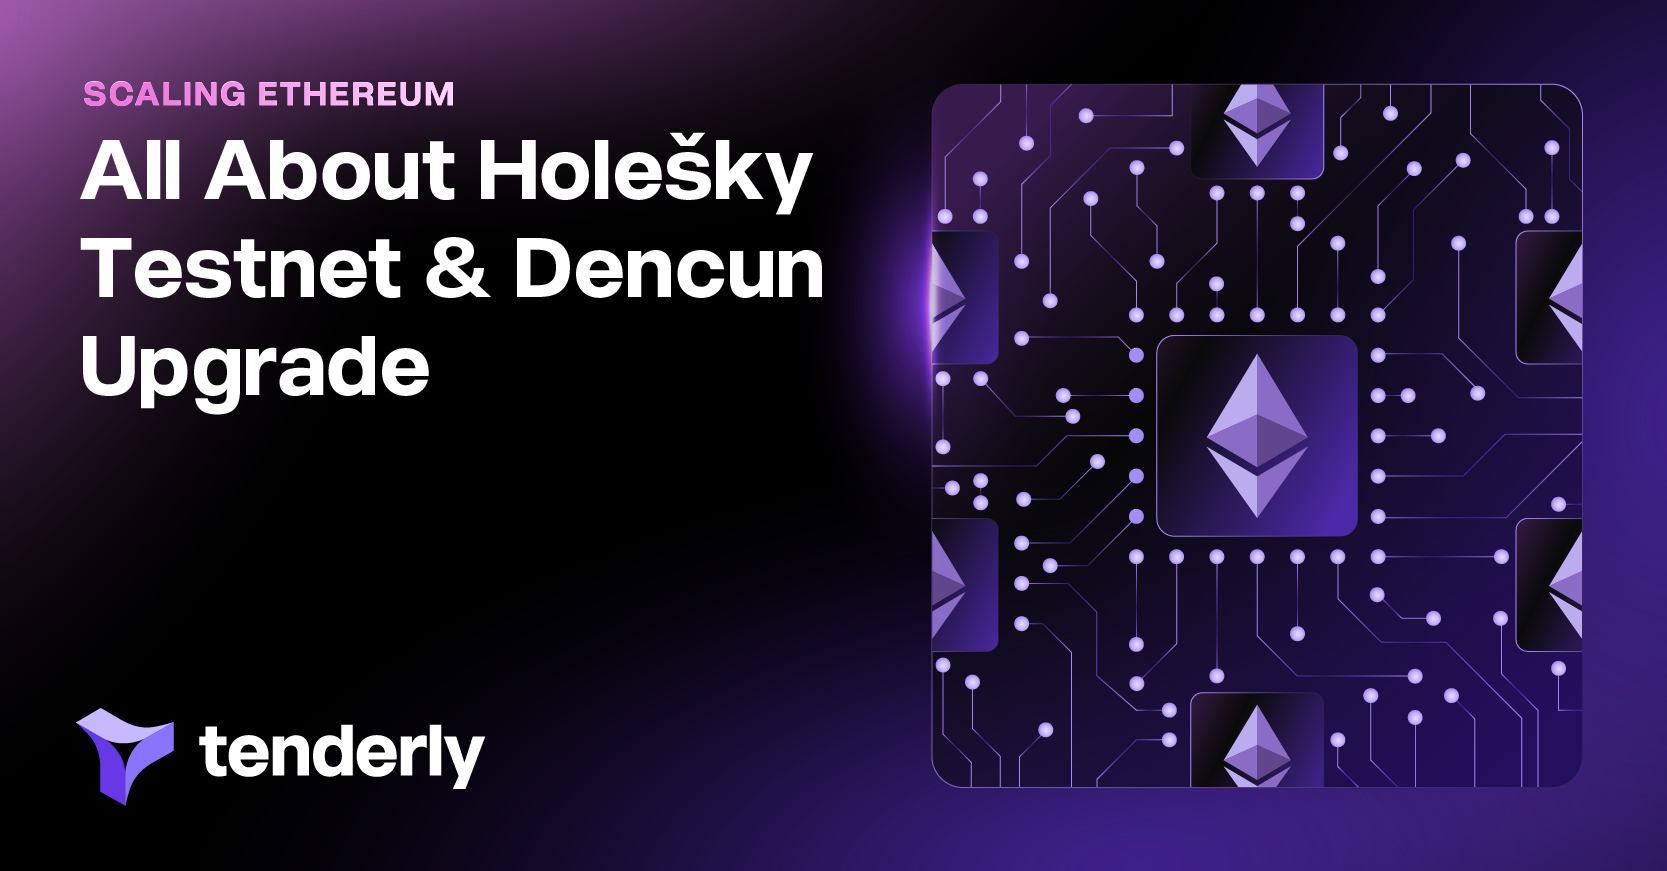 All you need to know about Holesky testnet and Dencun upgrade